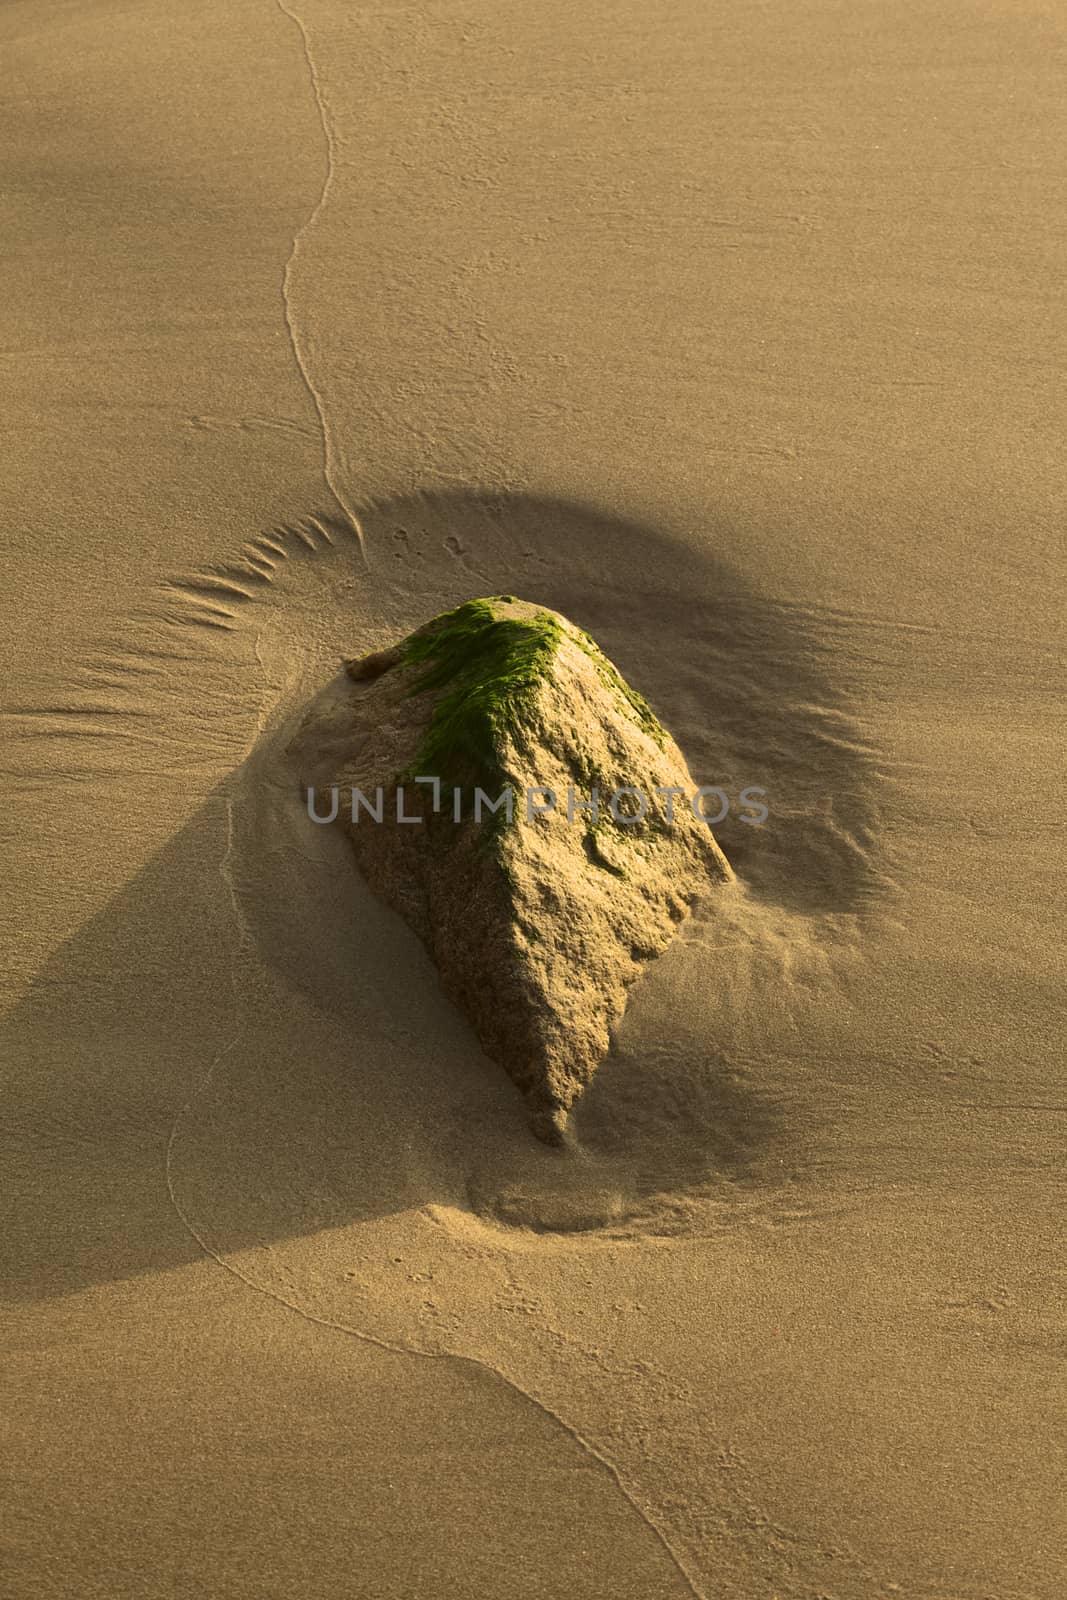 Small rock covered by some green algae on the sandy beach of the small town of Mancora in Northern Peru (Selective Focus, Focus on the rock)